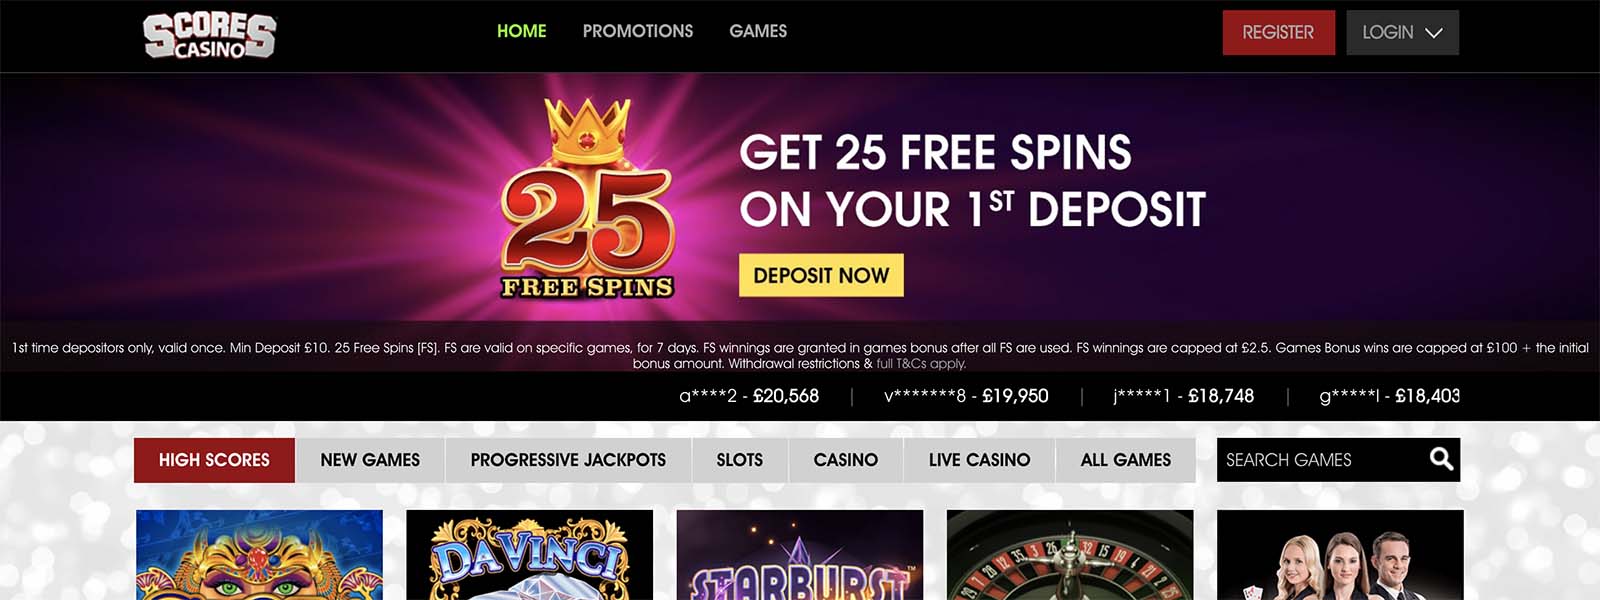 Scores Casino for apple instal free